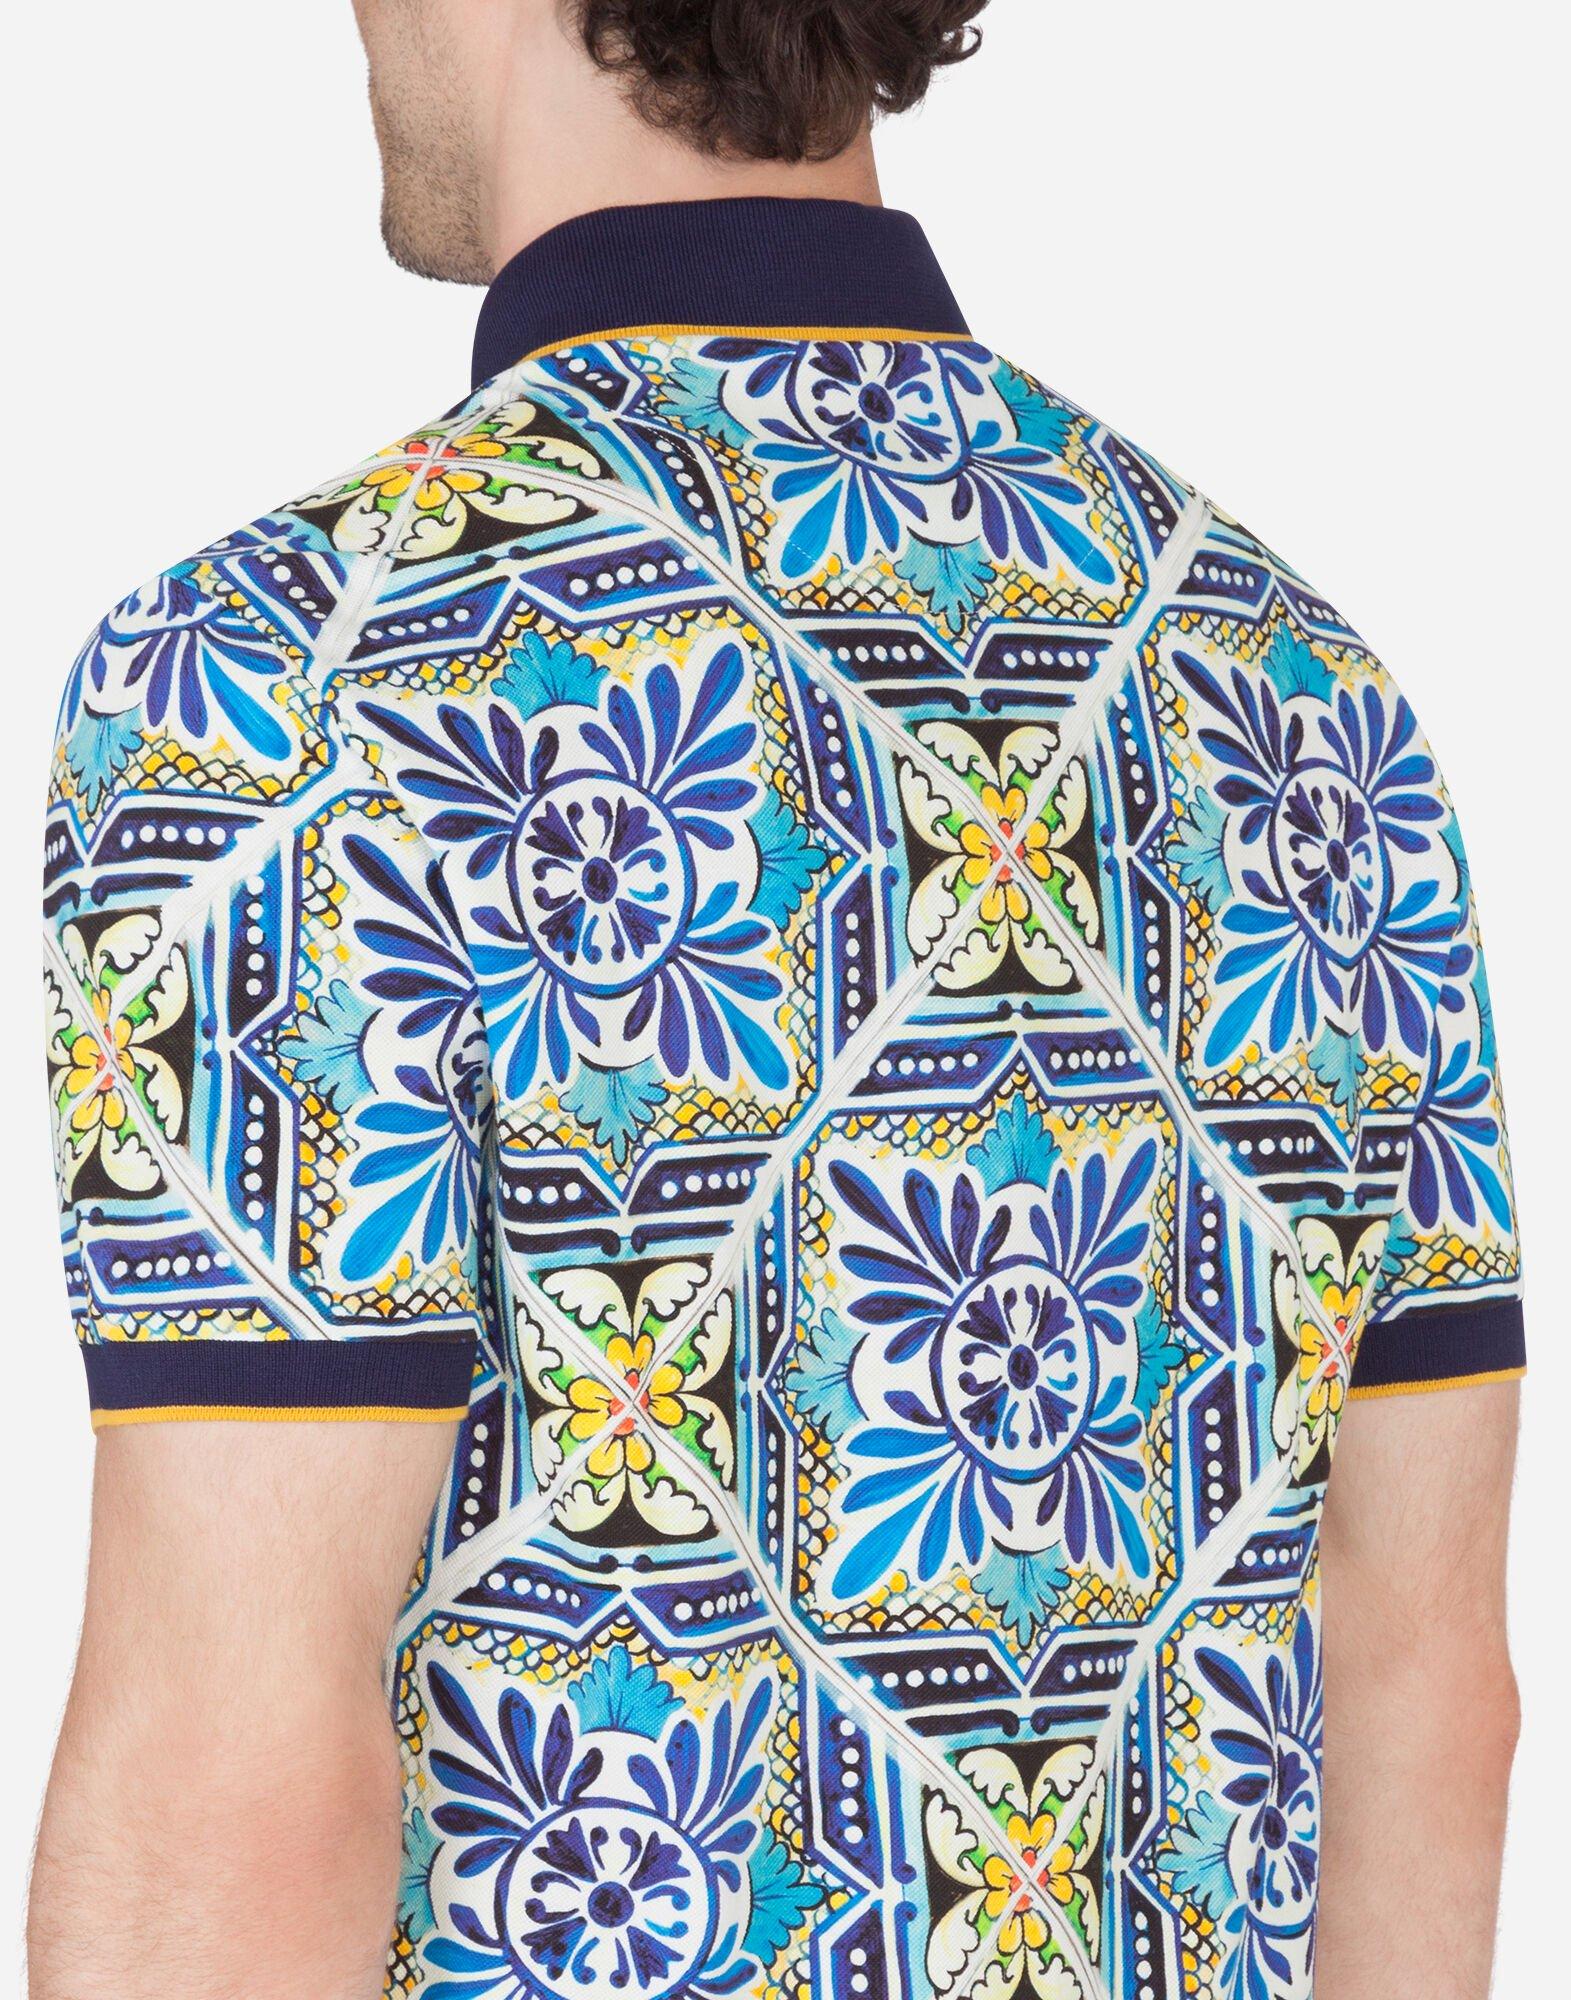 Dolce & Gabbana Cotton Polo Shirt With Maiolica Print in Blue for Men